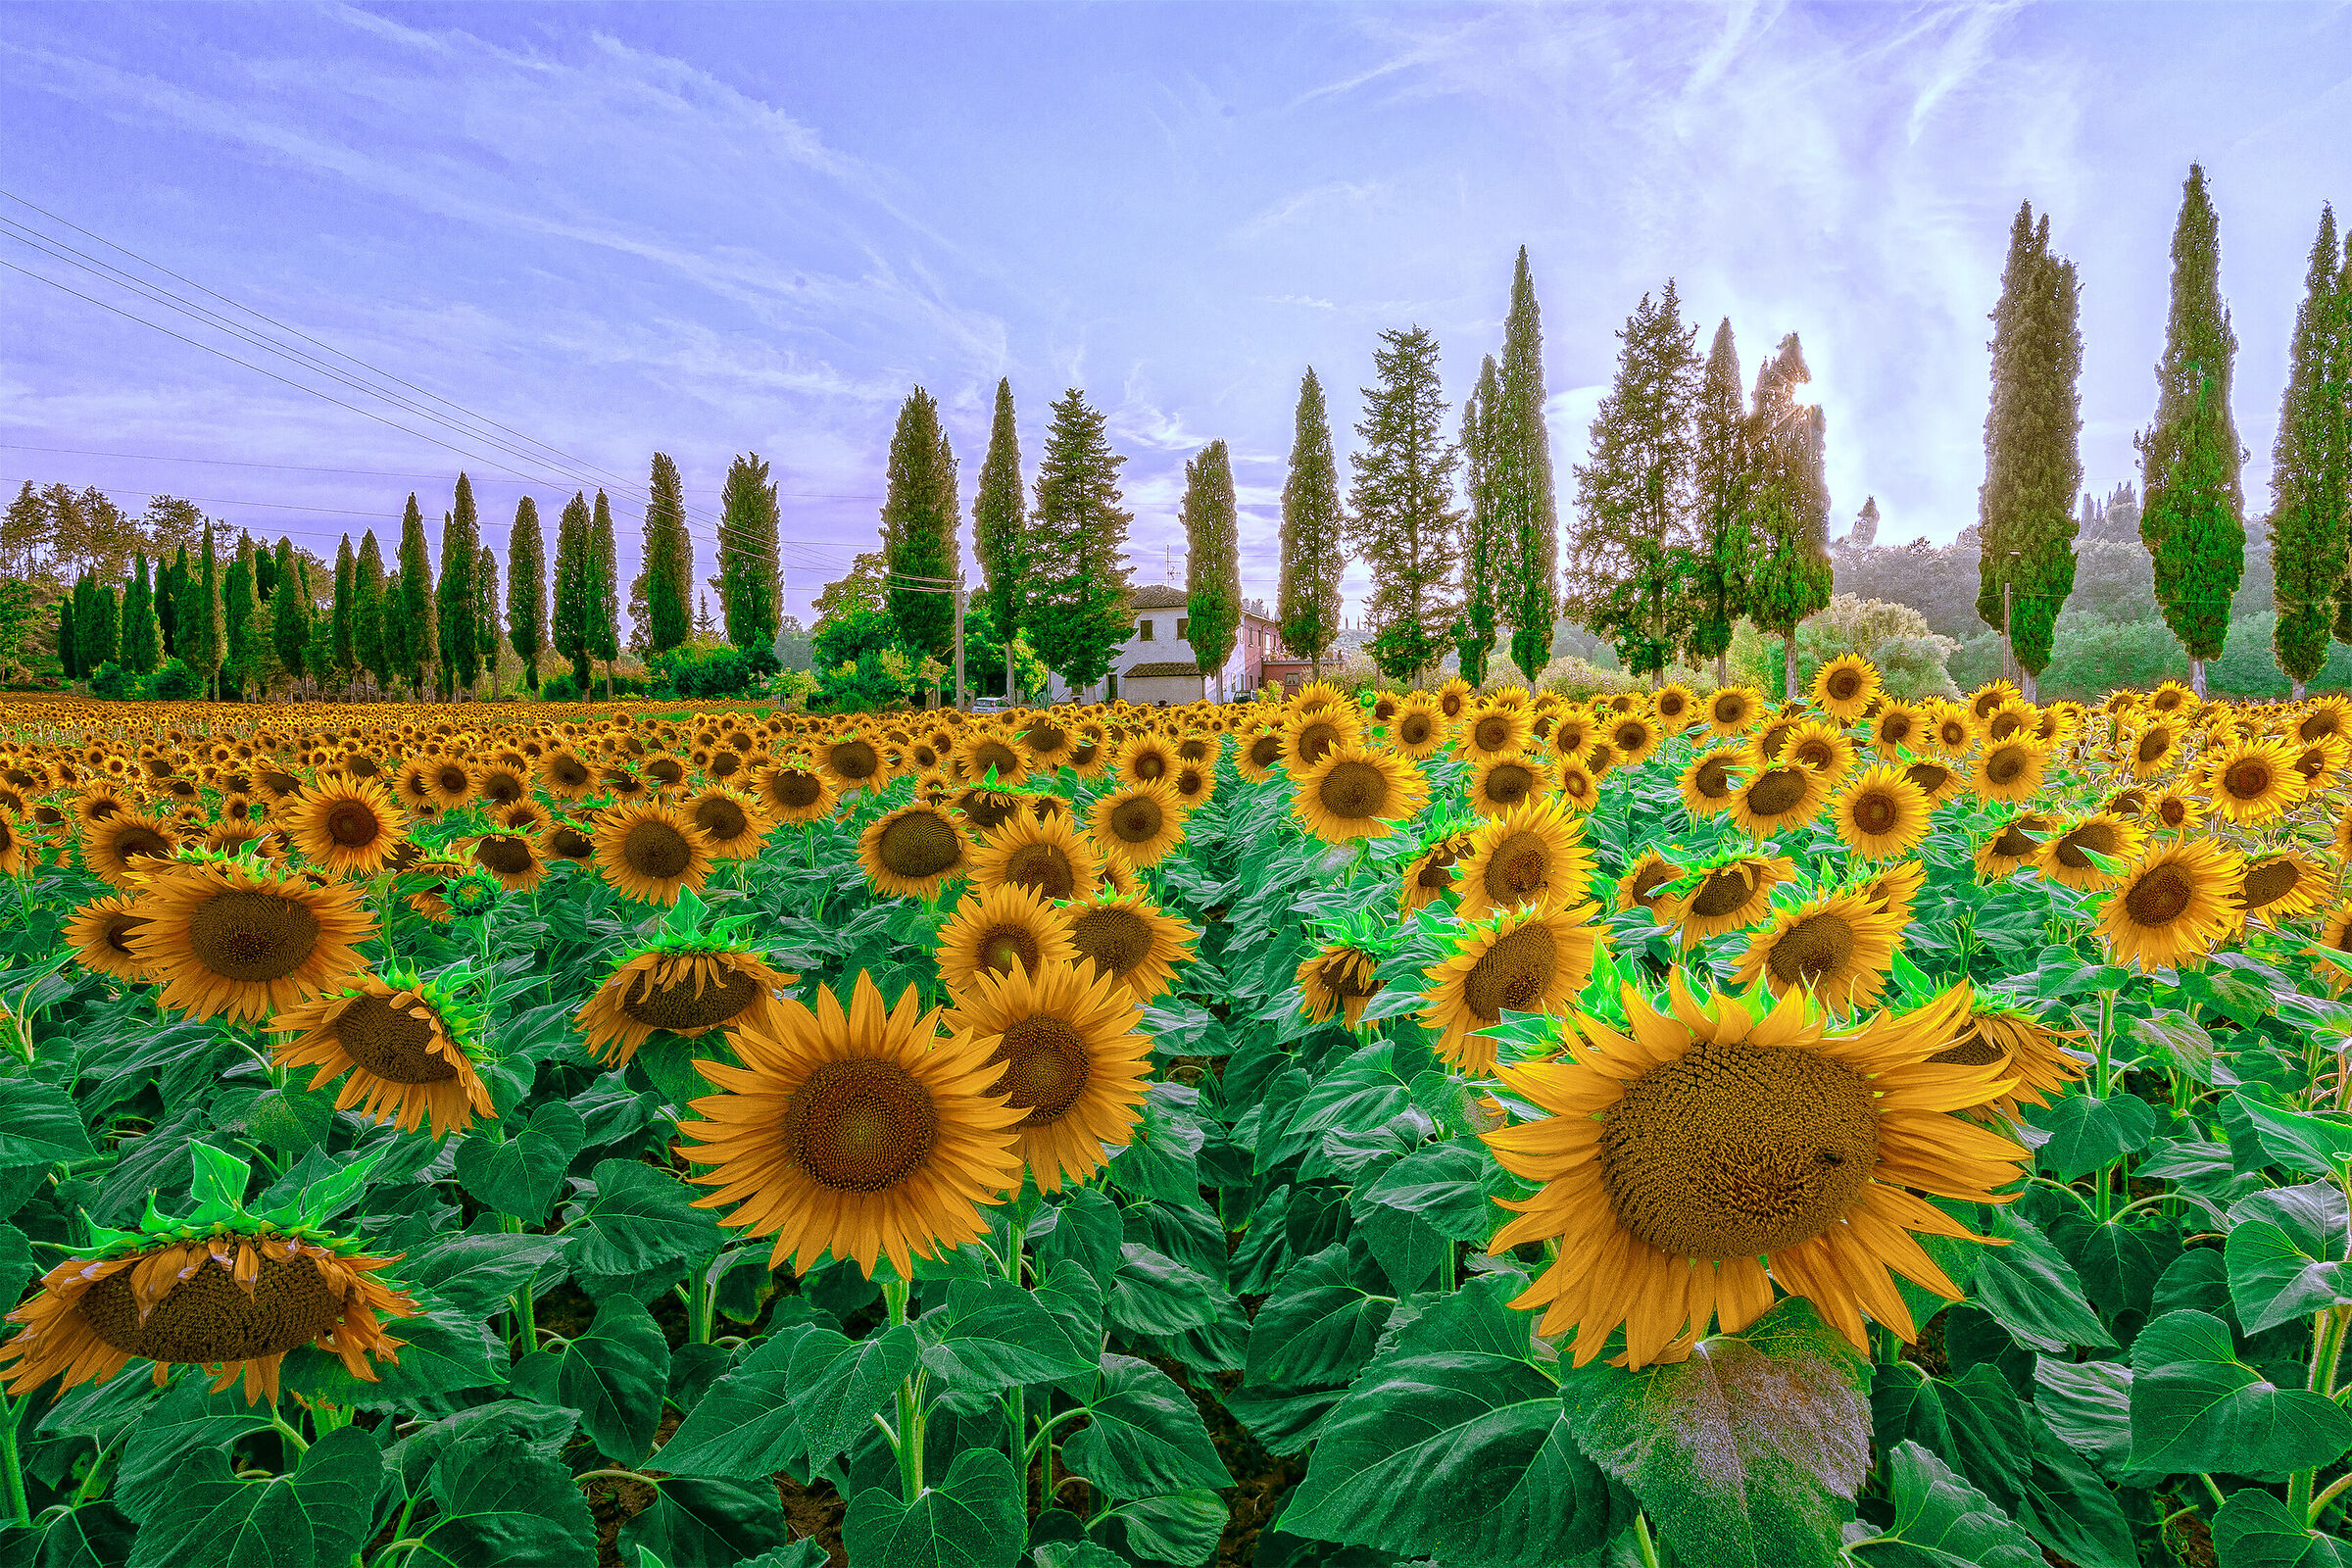 Sunflowers, cypresses, farmhouses. It's Tuscany....